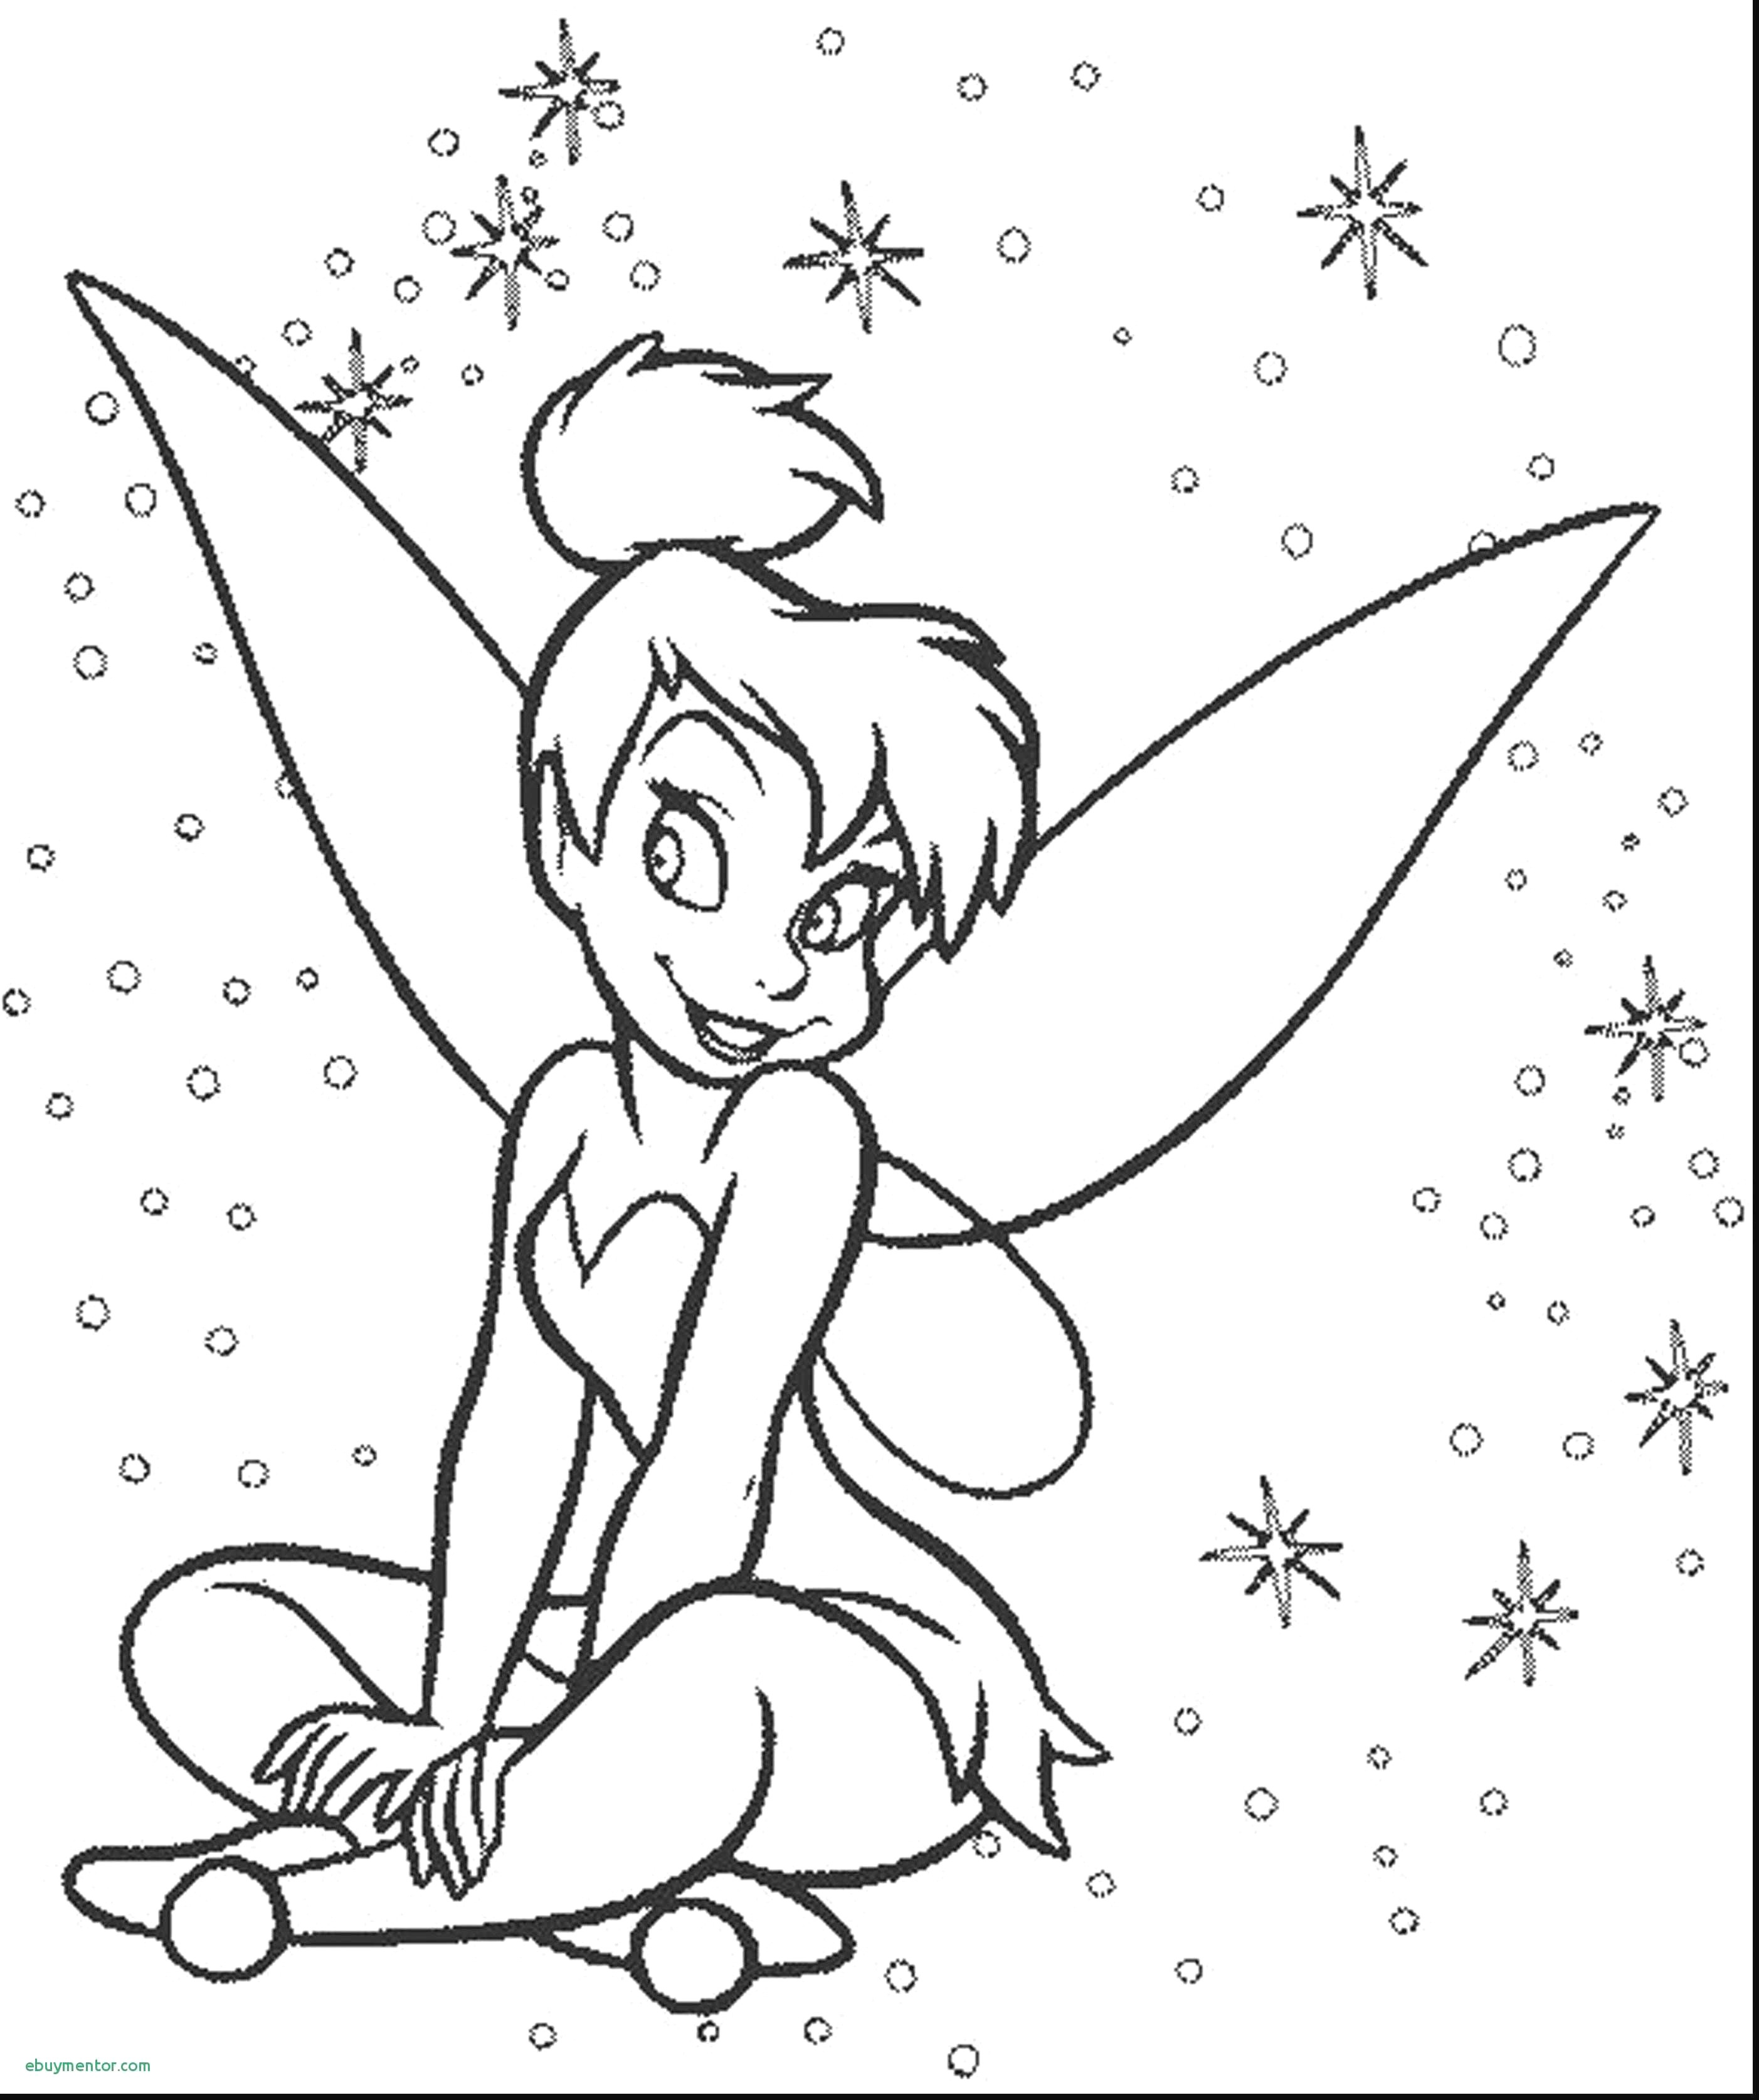 Free Printable Tinkerbell Coloring Pages Coloring Pages Coloring - Tinkerbell Coloring Pages Printable Free